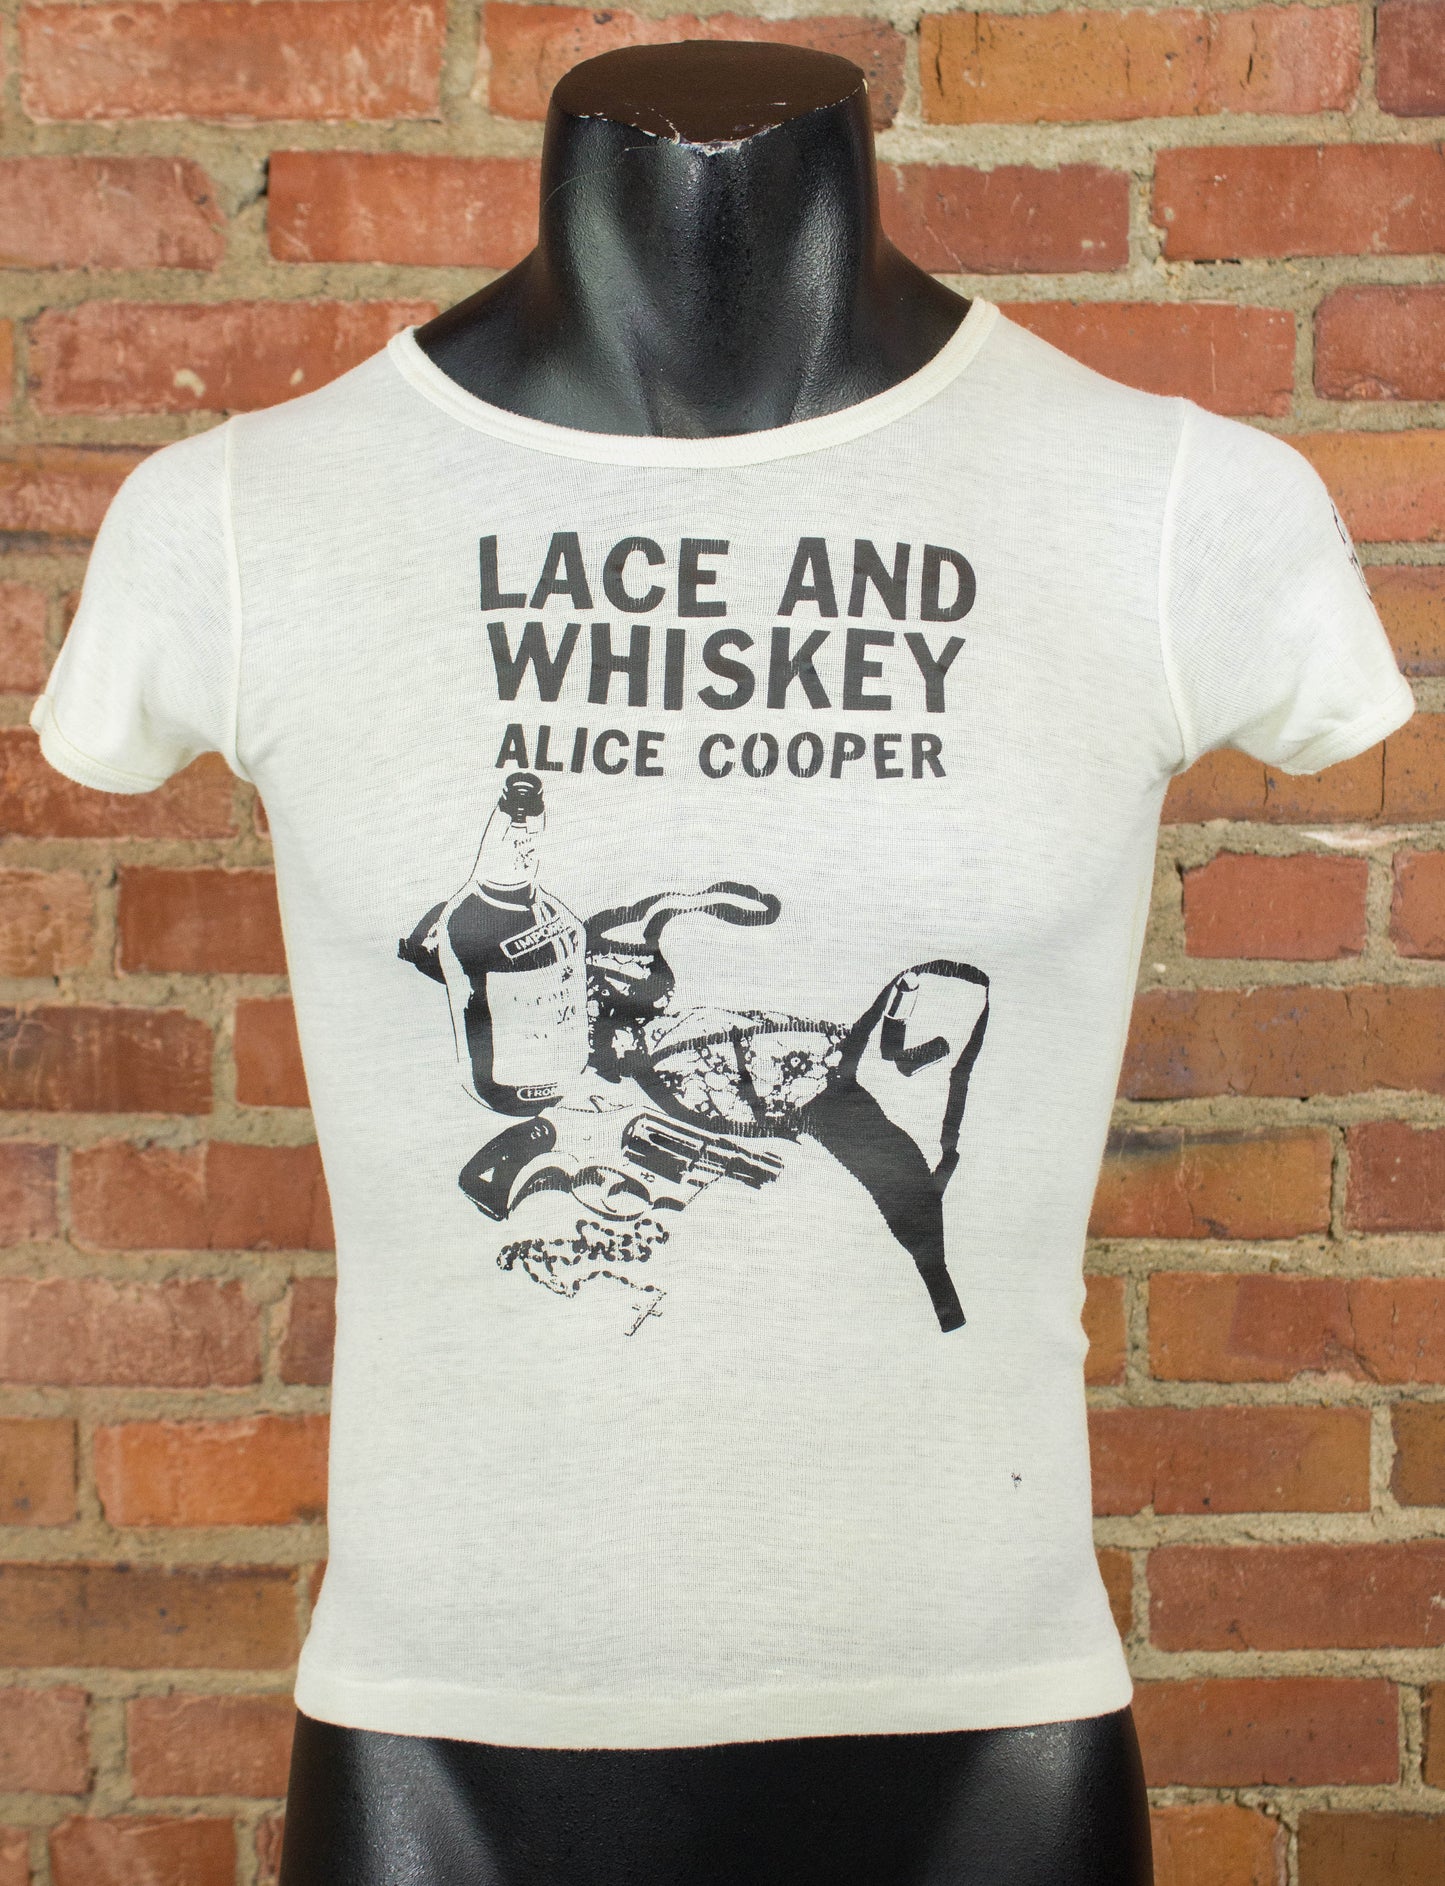 Vintage Alice Cooper Concert T Shirt 1977 Lace and Whiskey Warner Brothers Promo White XXS-XS